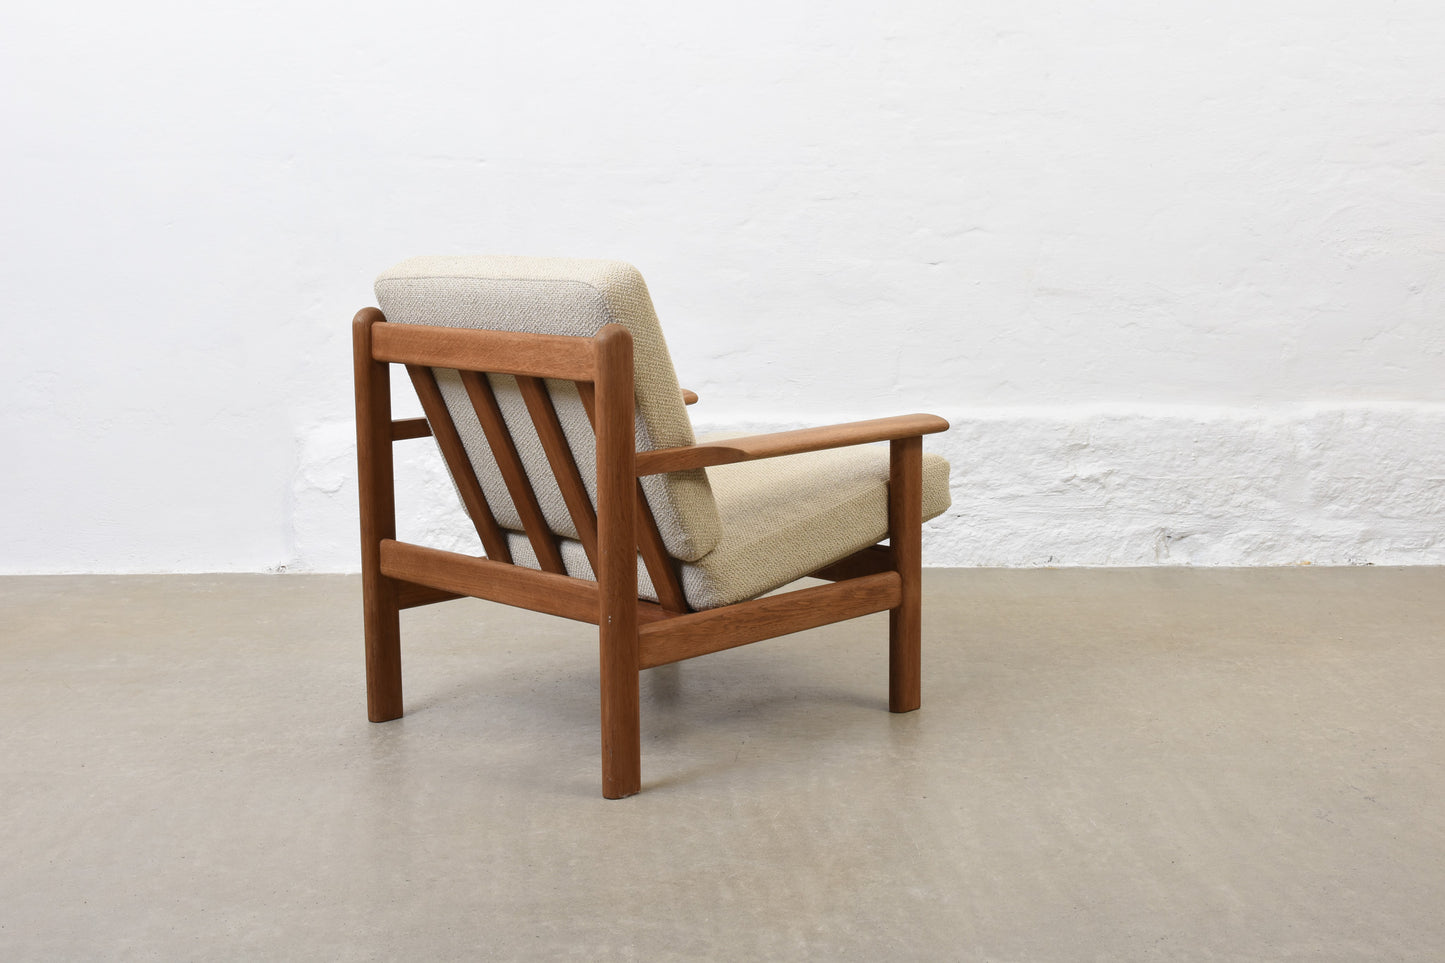 Newly reupholstered: Model 390 lounger by Poul Volther